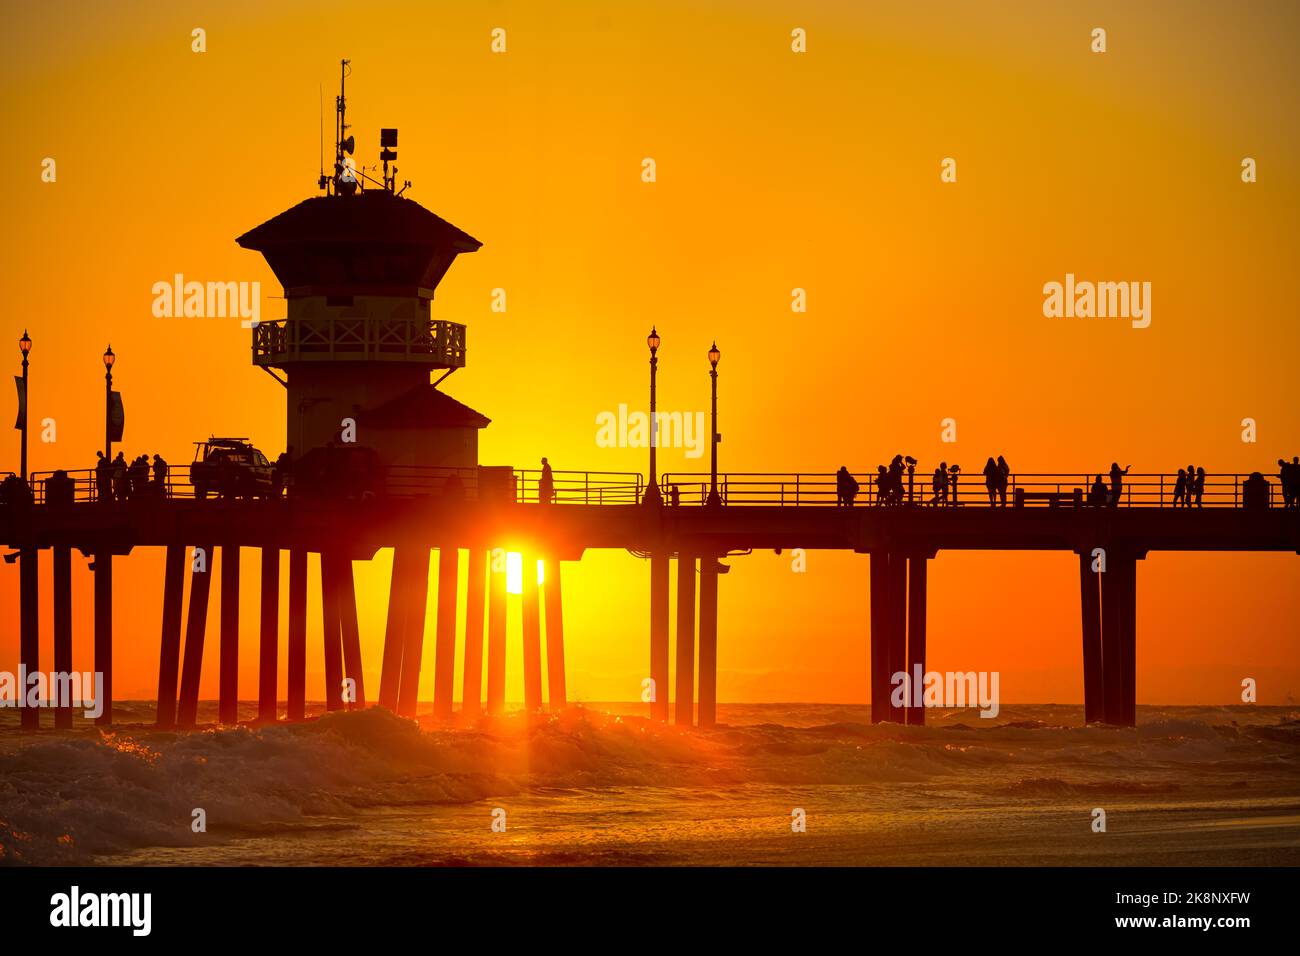 A silhouette of a pier with walking people under an orange sunset sky on Huntington Beach, California Stock Photo